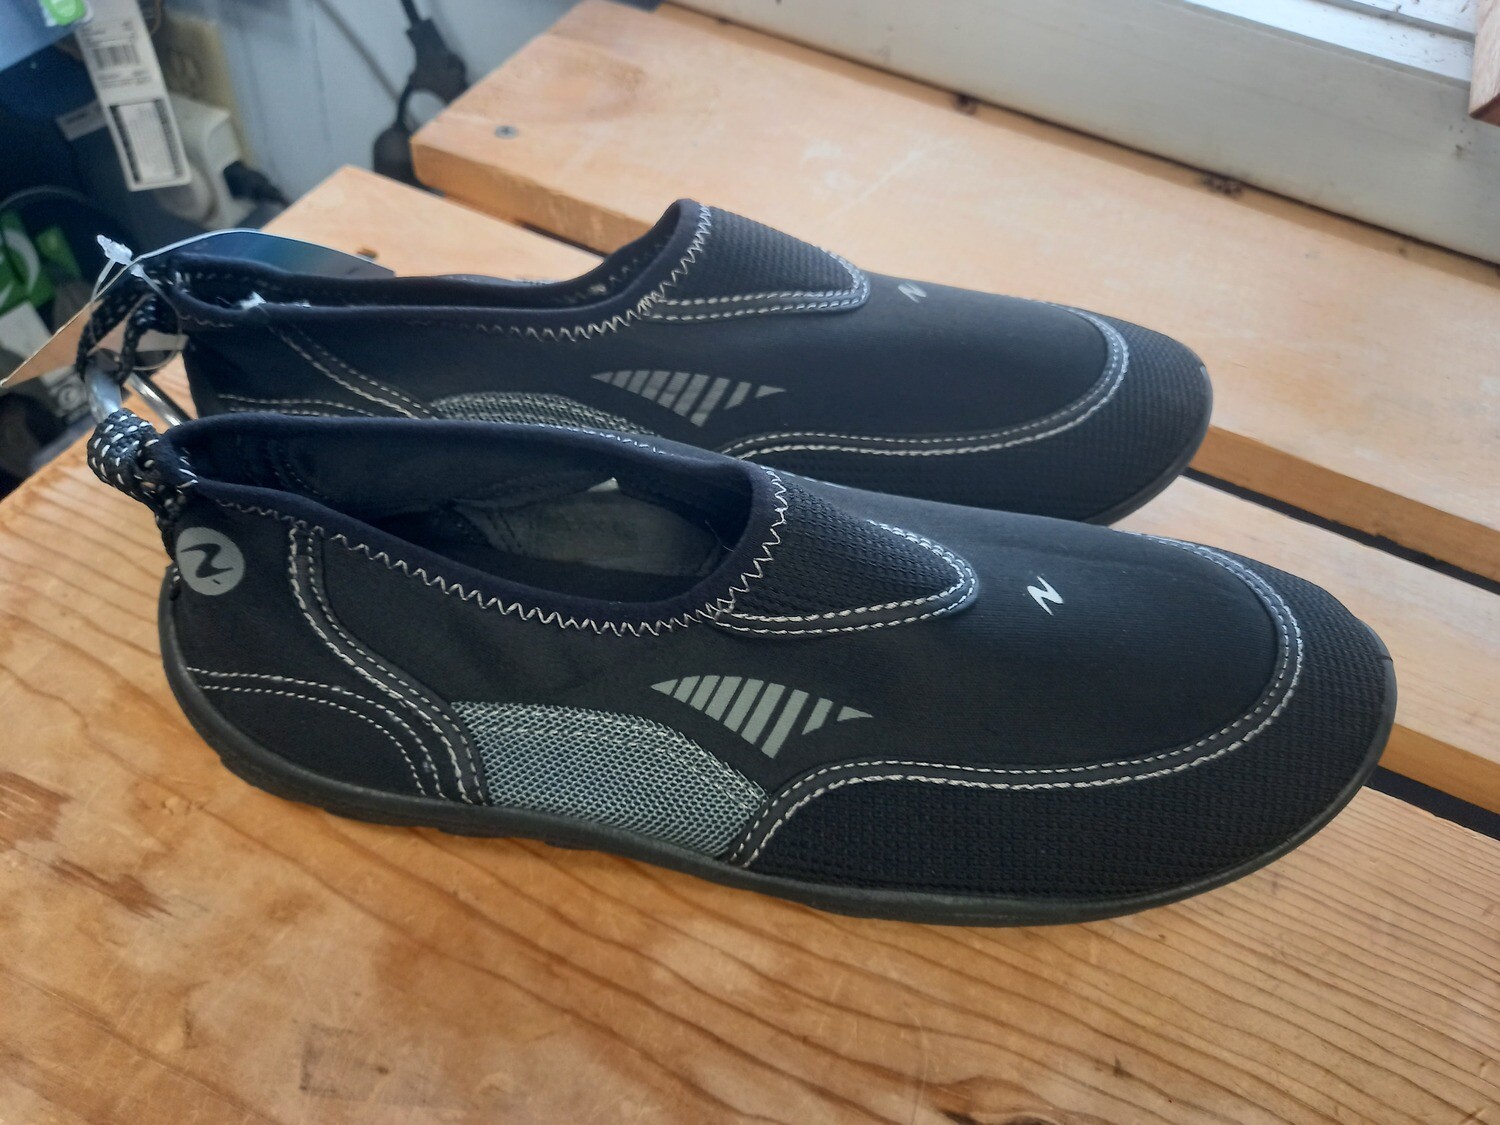 Stohlquist Seaboard water shoes